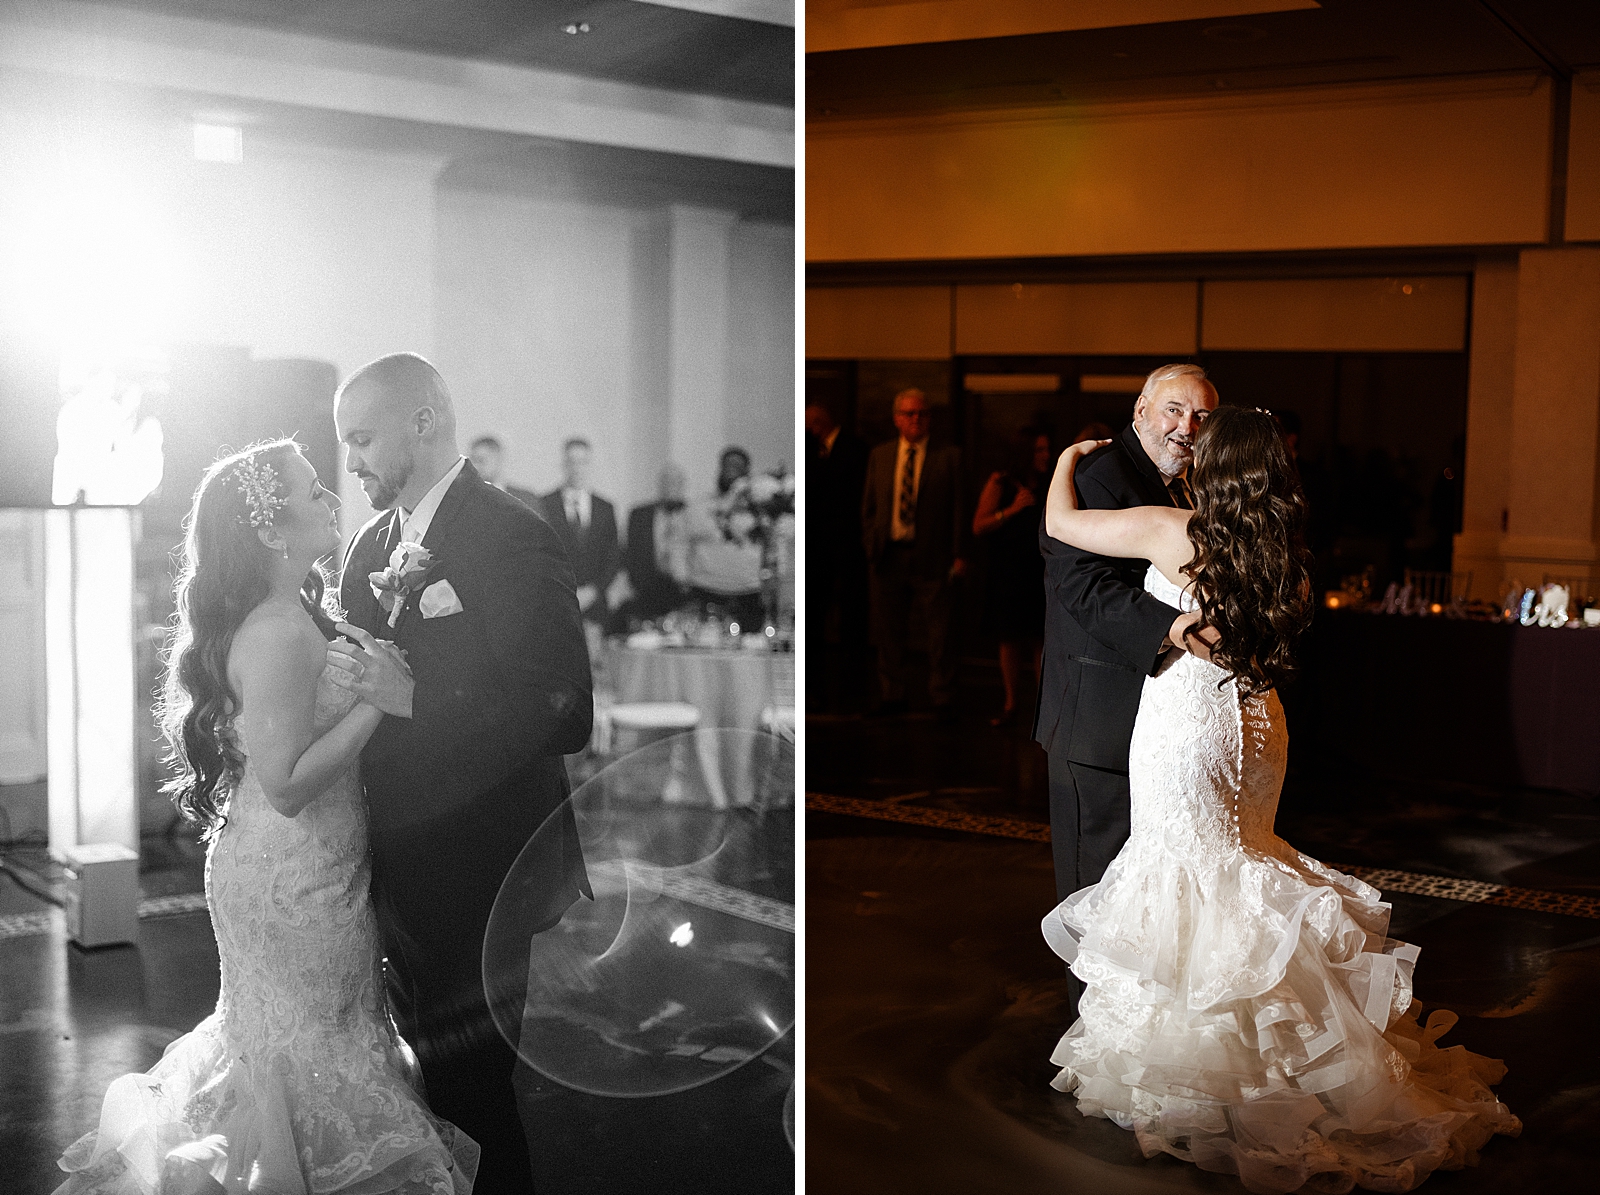 Bride and Groom first dance at Reception